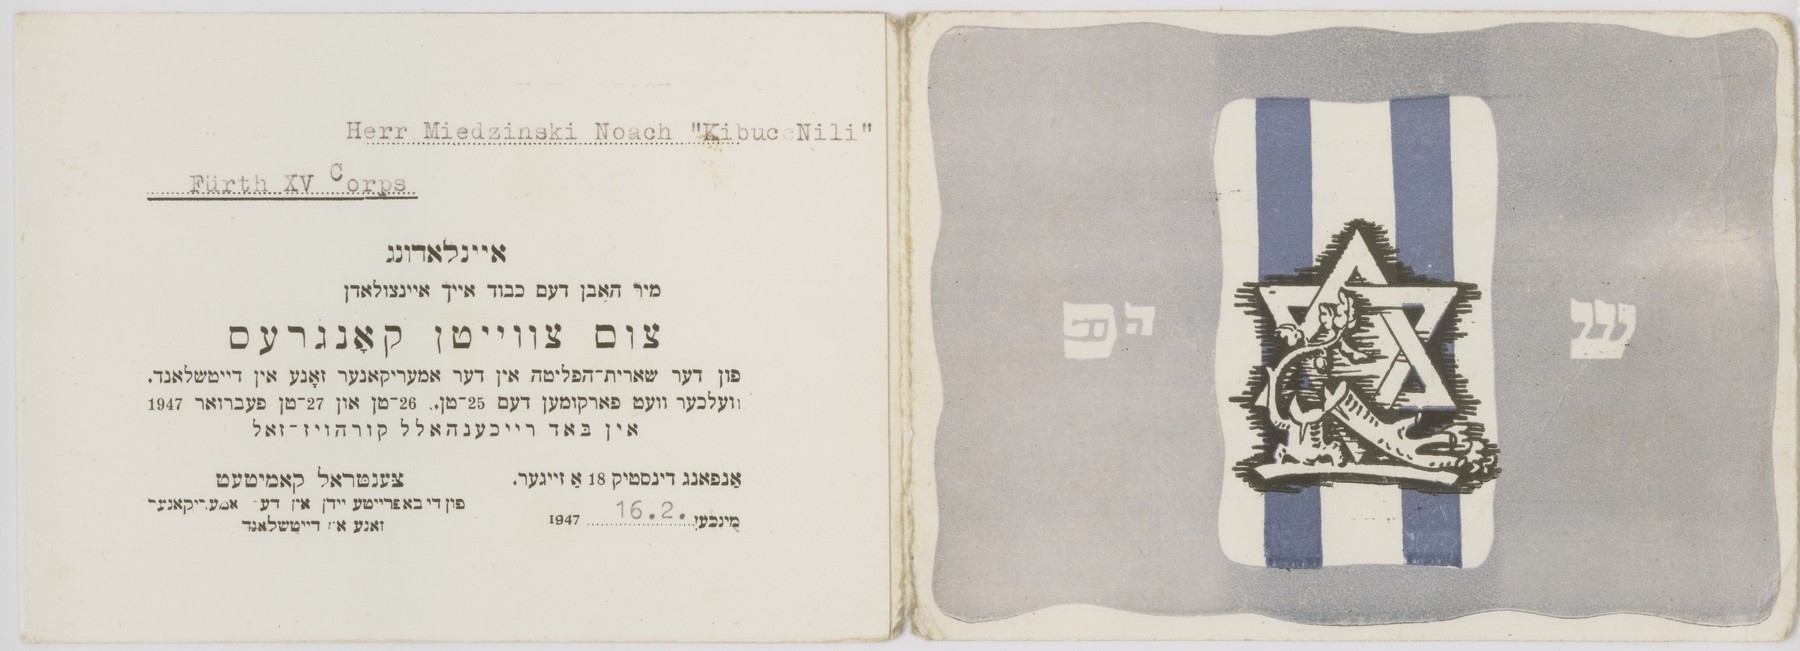 Invitation issued to Noach Miedzinksi, camp administrator of Kibbutz Nili, to attend the Second Congress of the Central Committee of the Liberated Jews in the US Zone of Occupation.